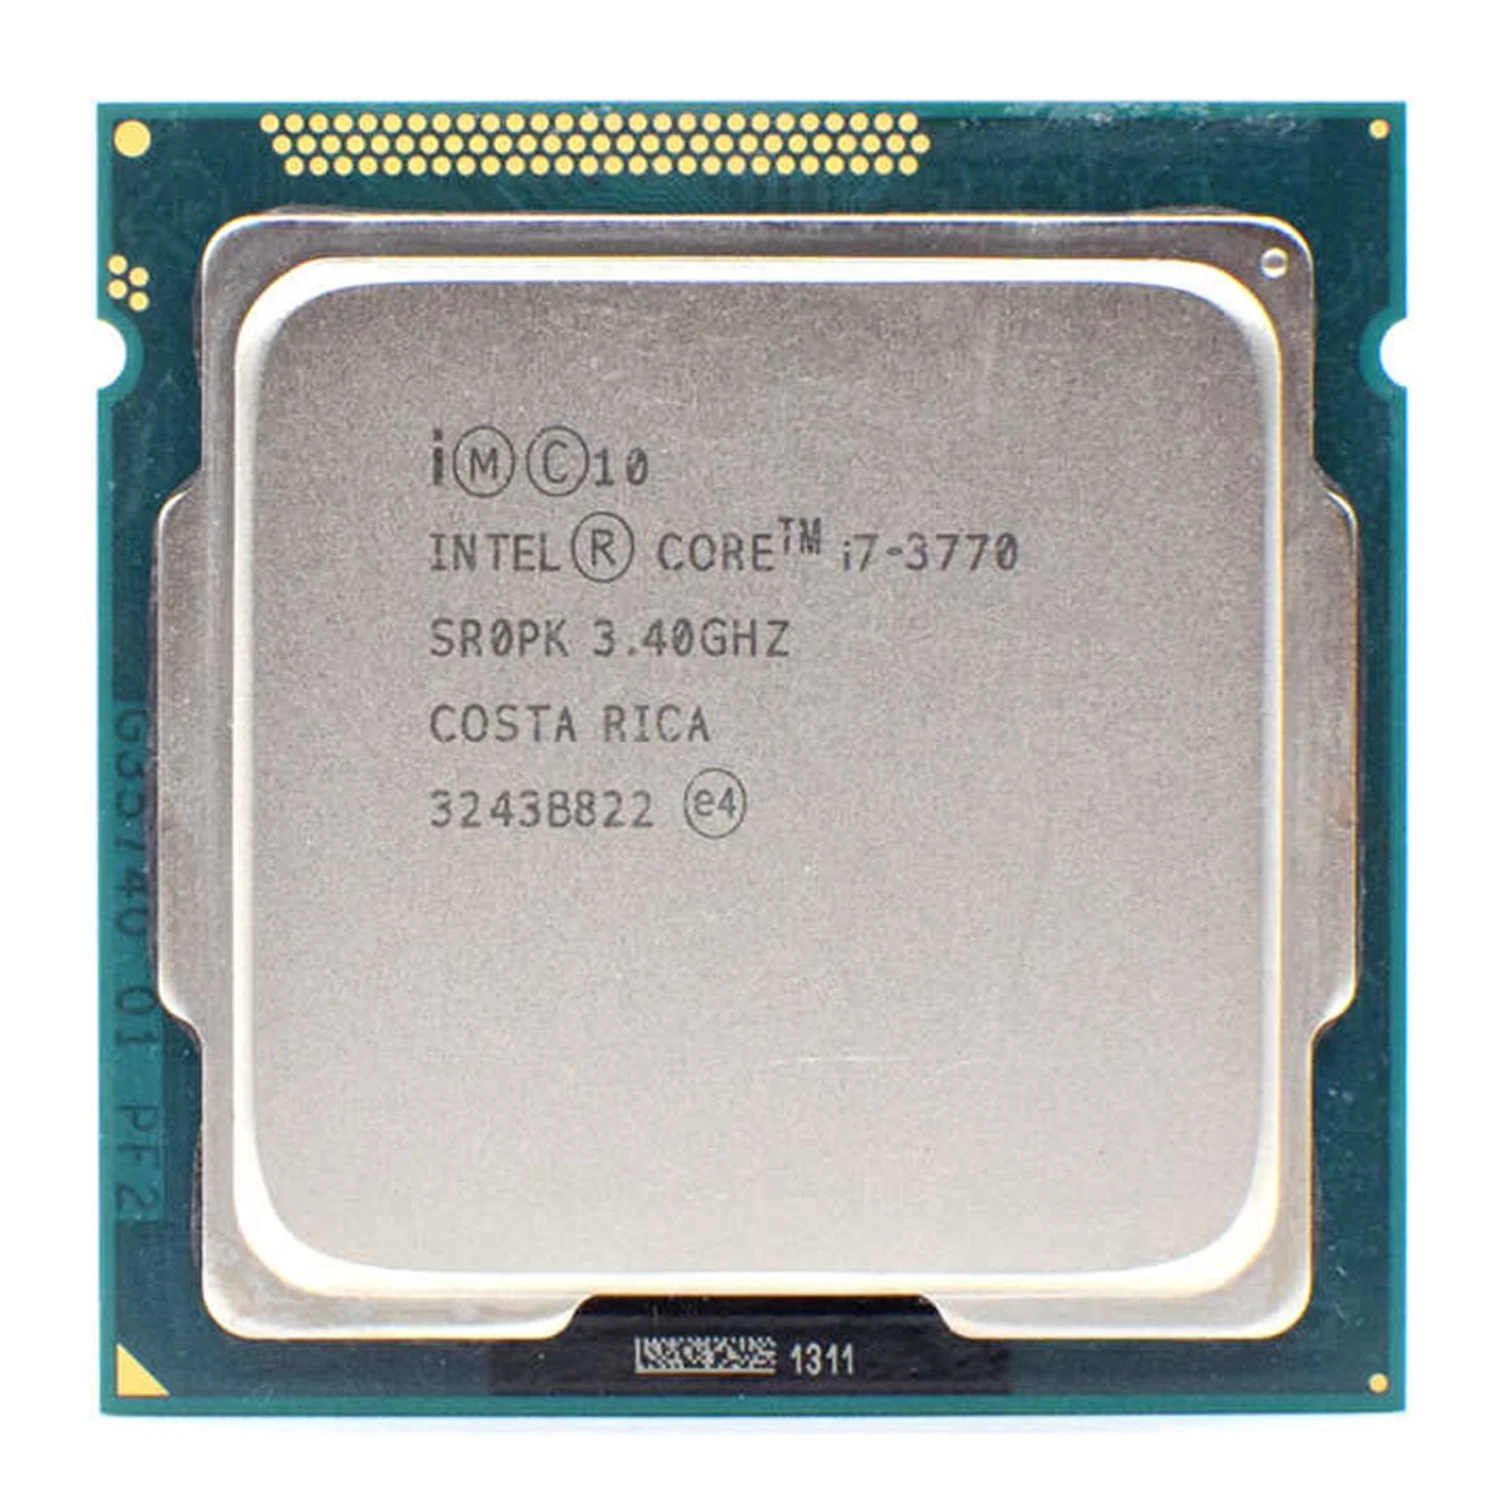 Processador Intel Core i7 3770 OEM Socket 1155 4 Cores 8 Threads 3.90 GHz 3.40 GHz Turbo Cache 8 MB

